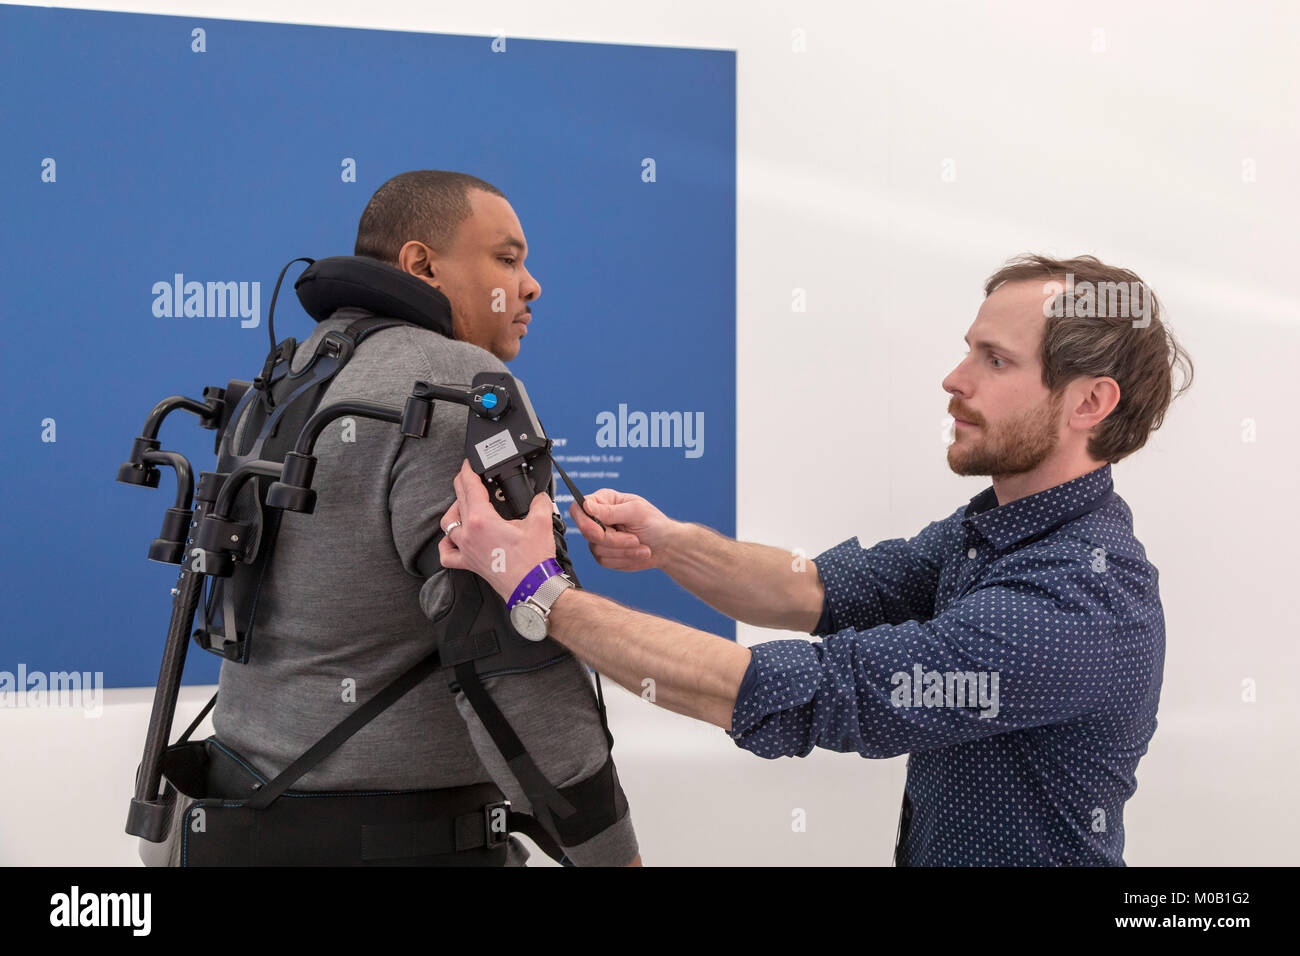 Detroit, Michigan - Marty Smets adjusts an exoskeleton worn by Carlo Bishop, both of Ford Motor Company, at the North American International Auto Show Stock Photo